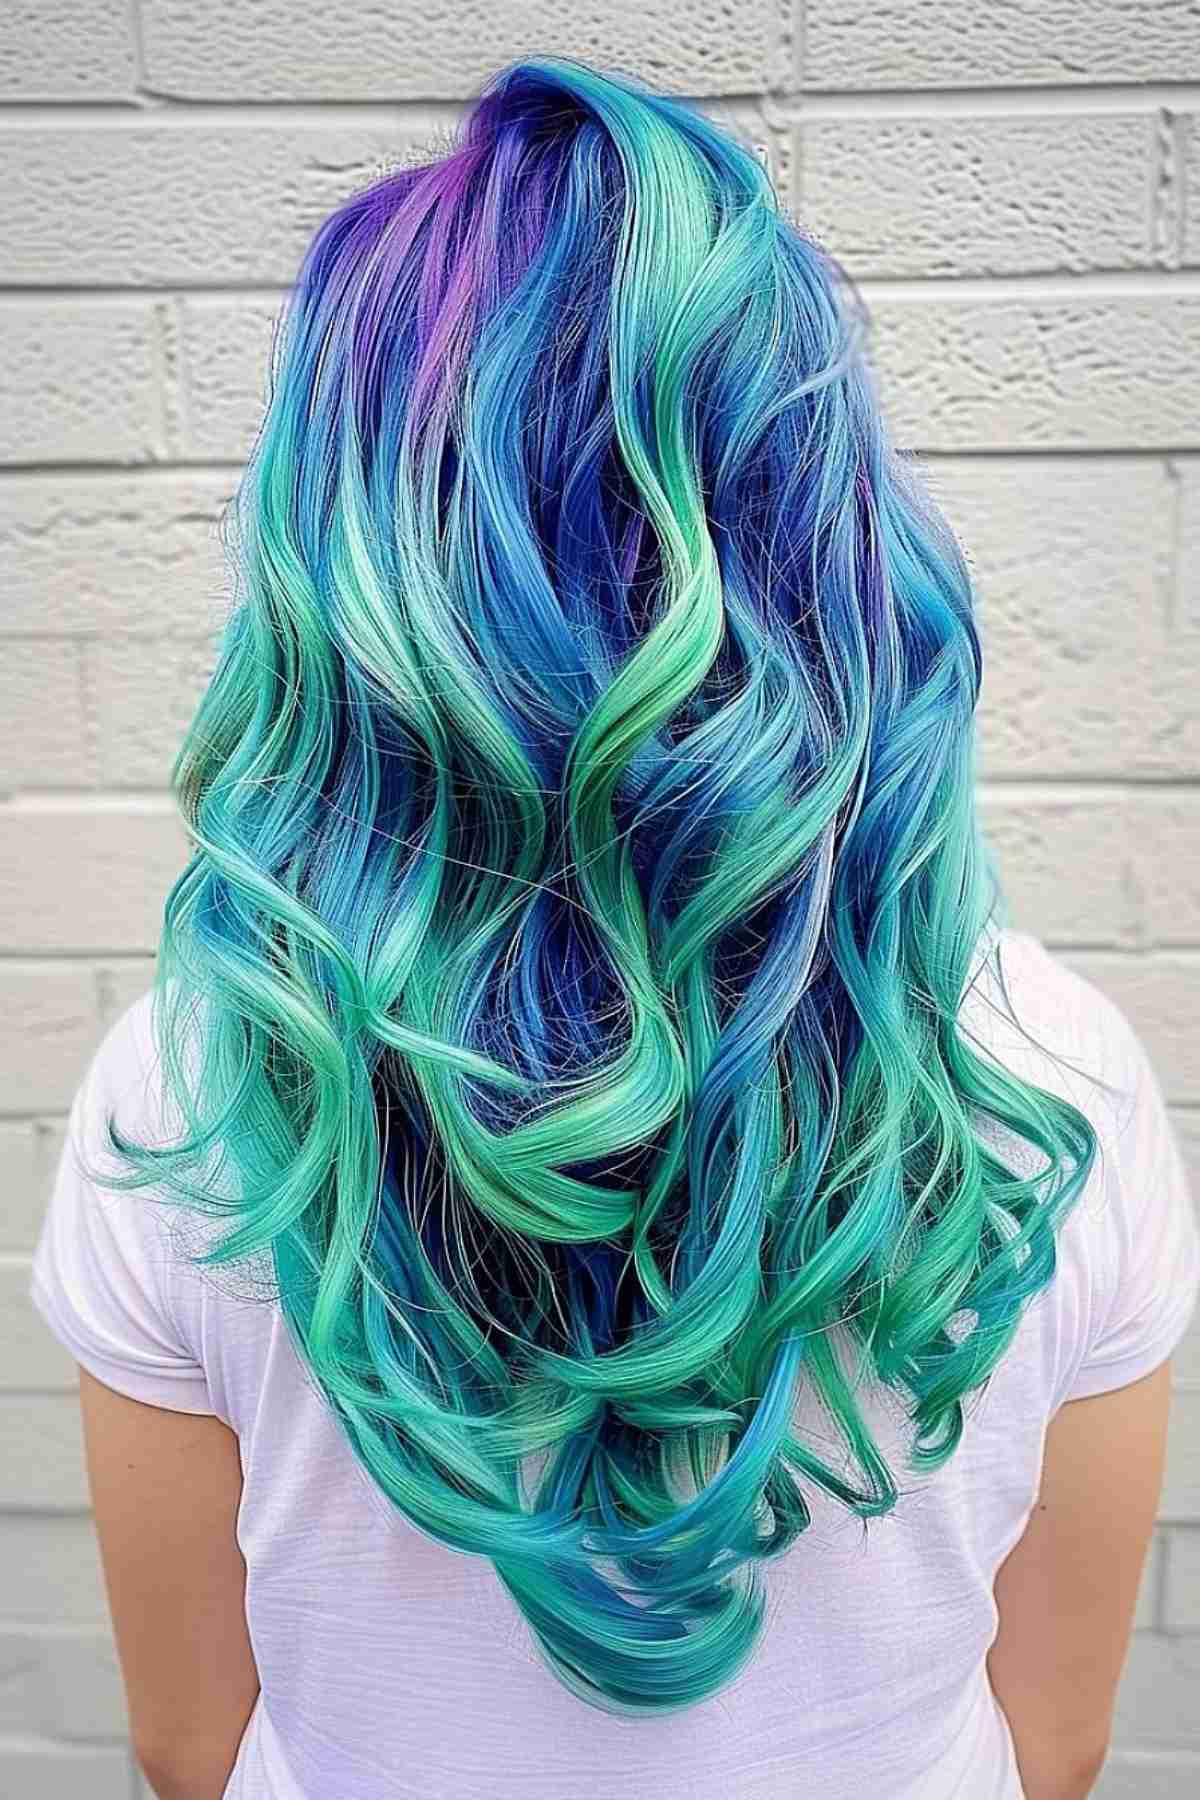 Long layered mermaid hair with a gradient from deep blue to teal and green